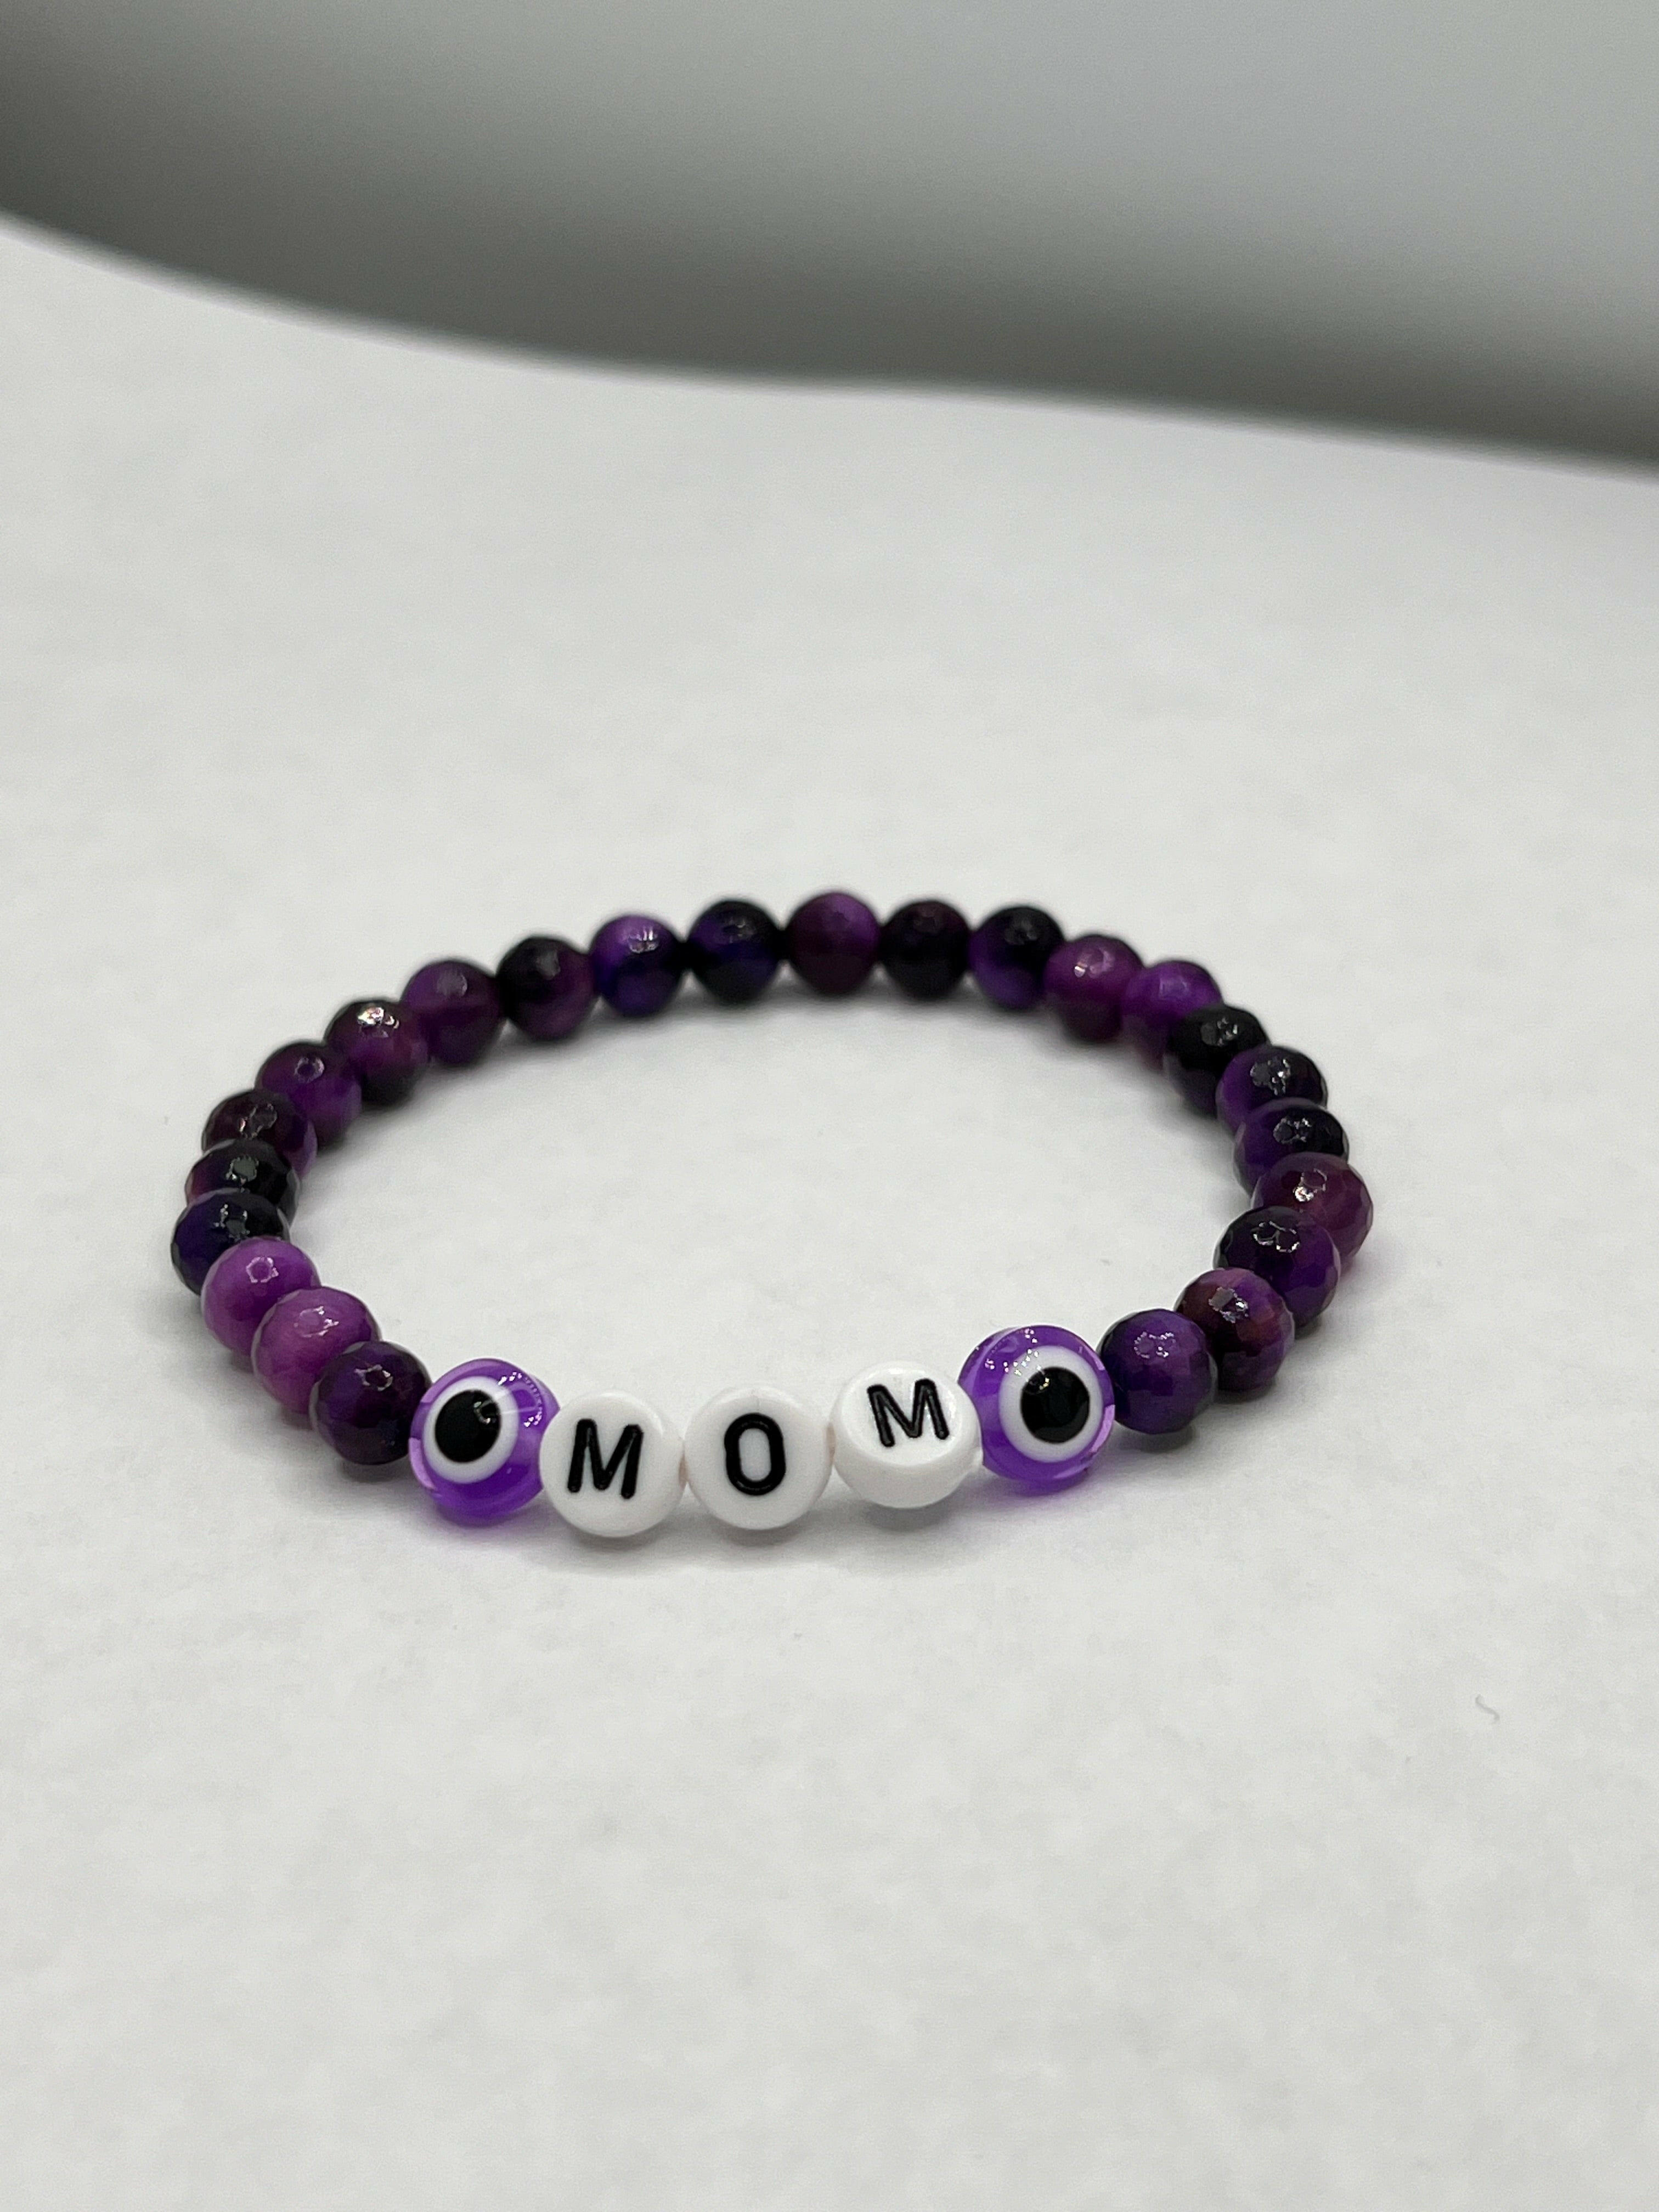 Elegant Mother's Day Bracelet - Ideal for gifting, featuring timeless design